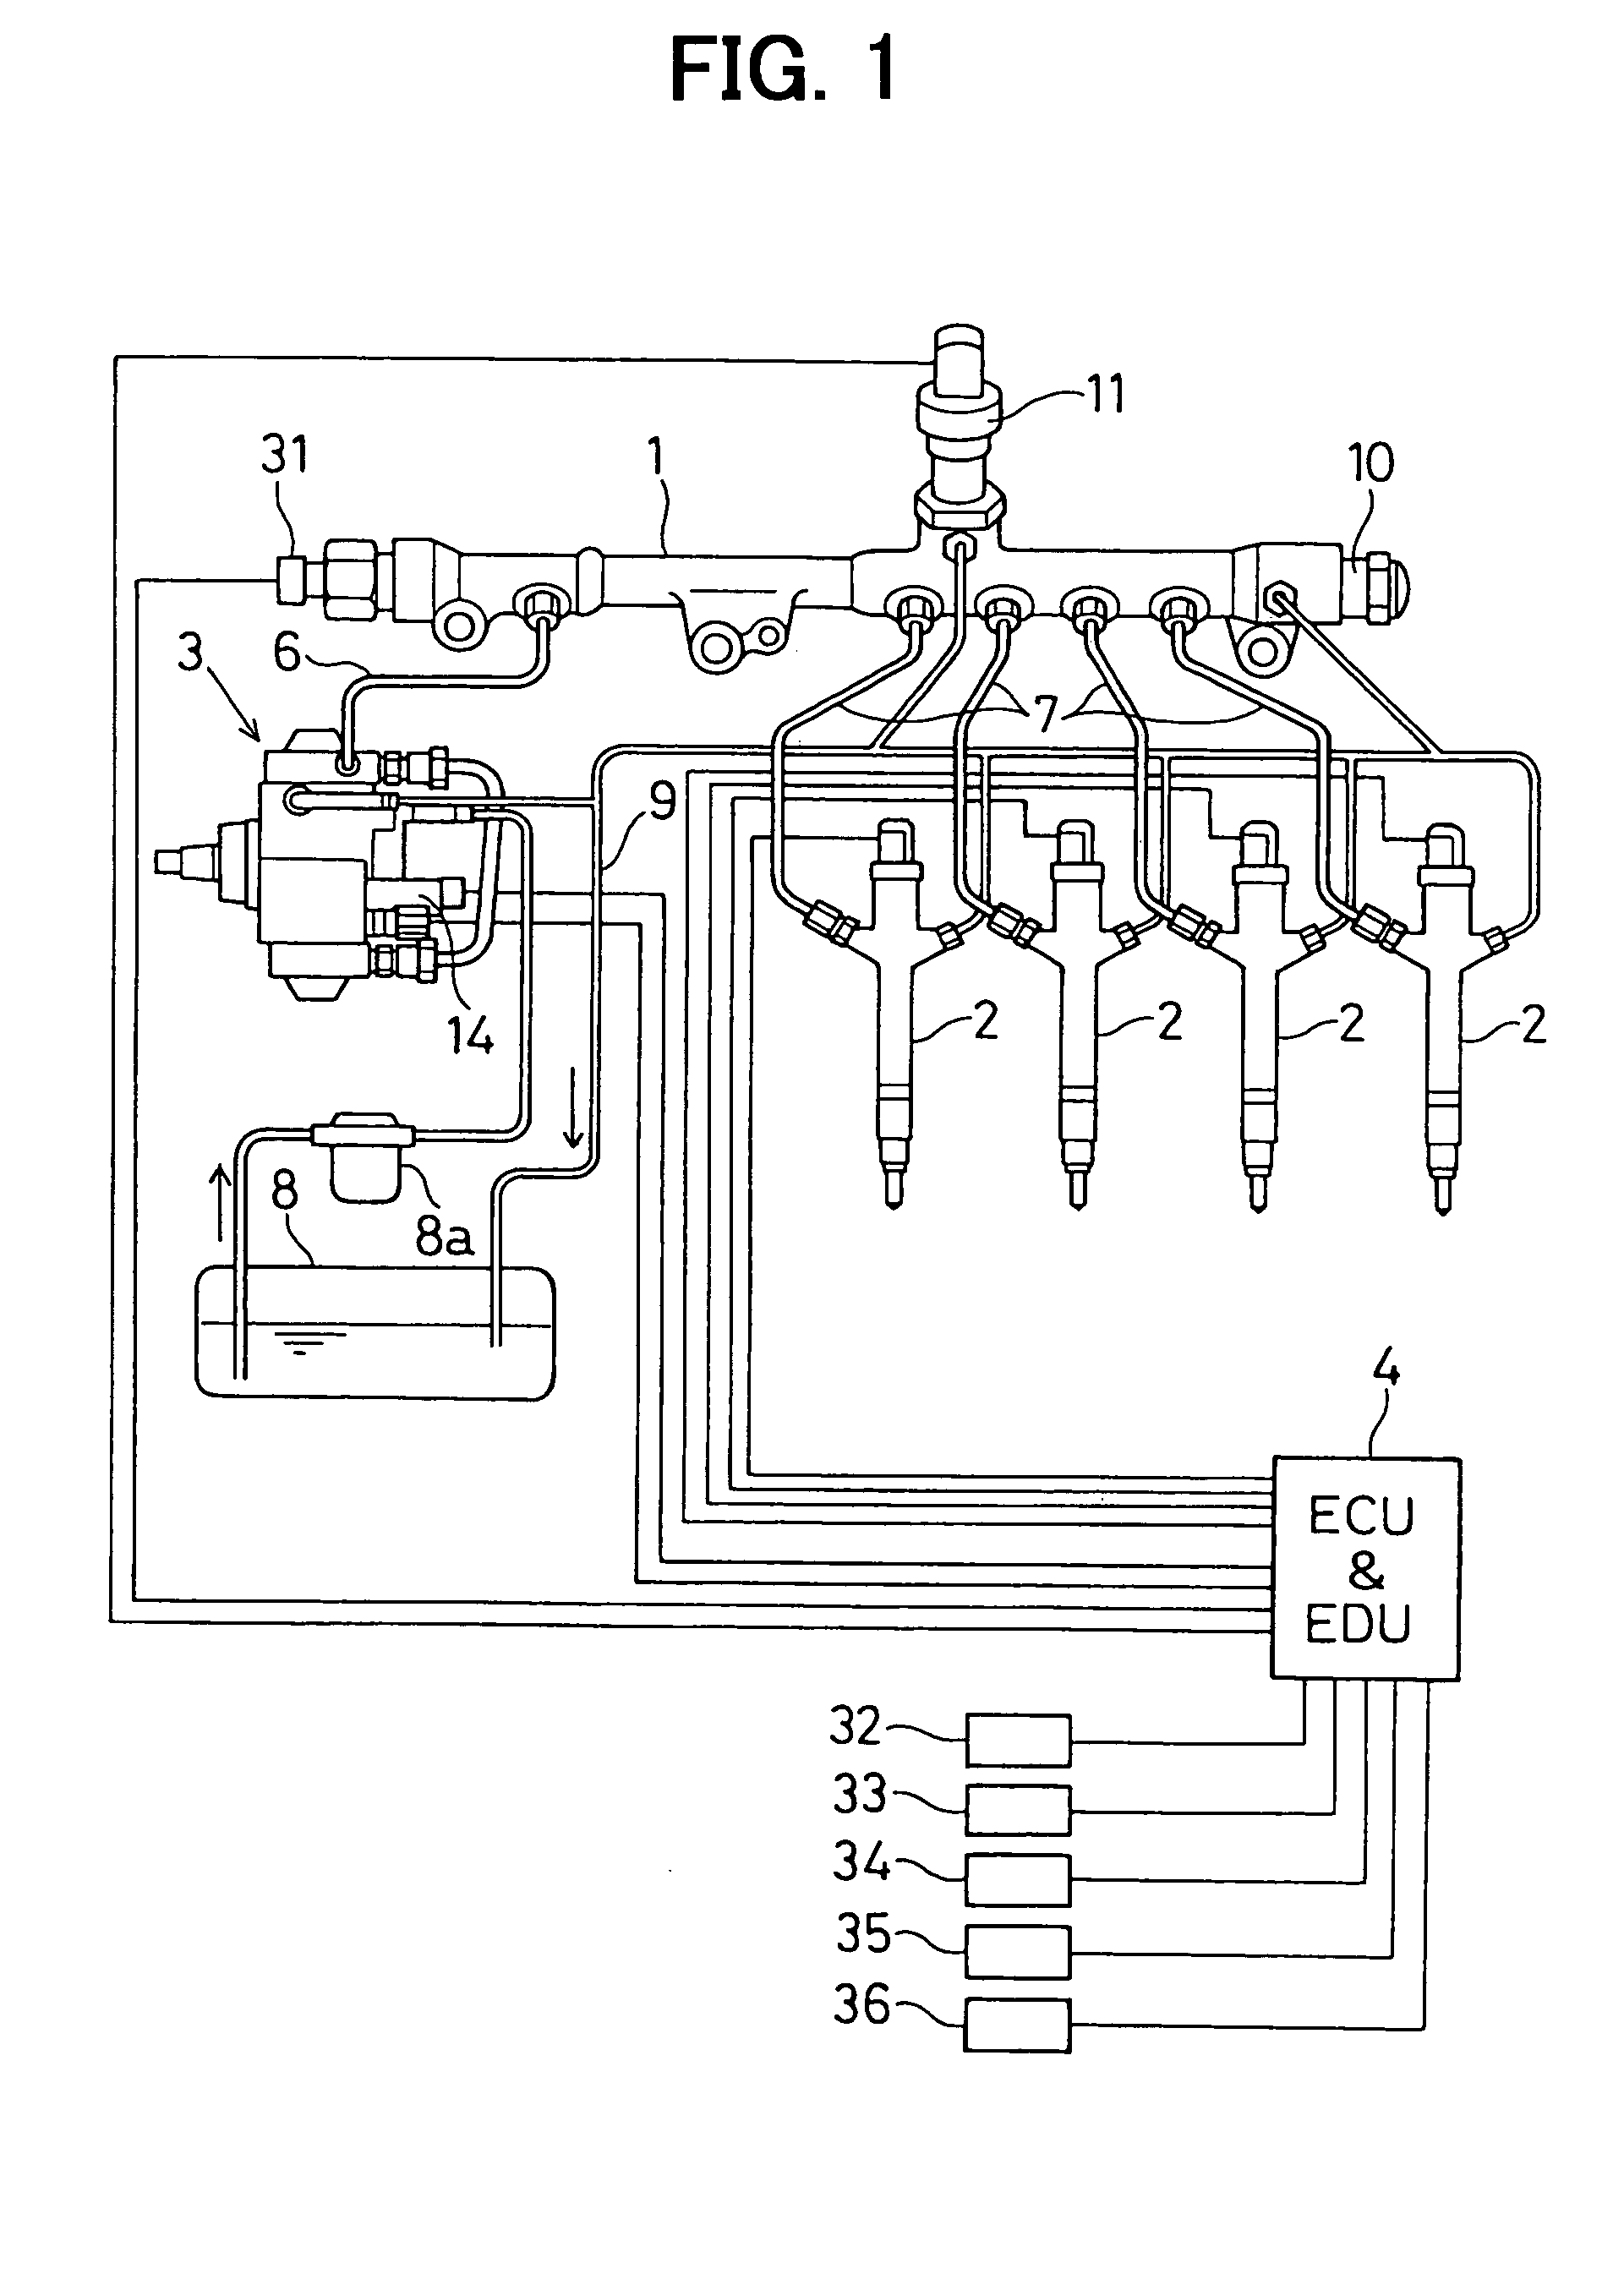 Valve opening degree control system and common rail type fuel injection system